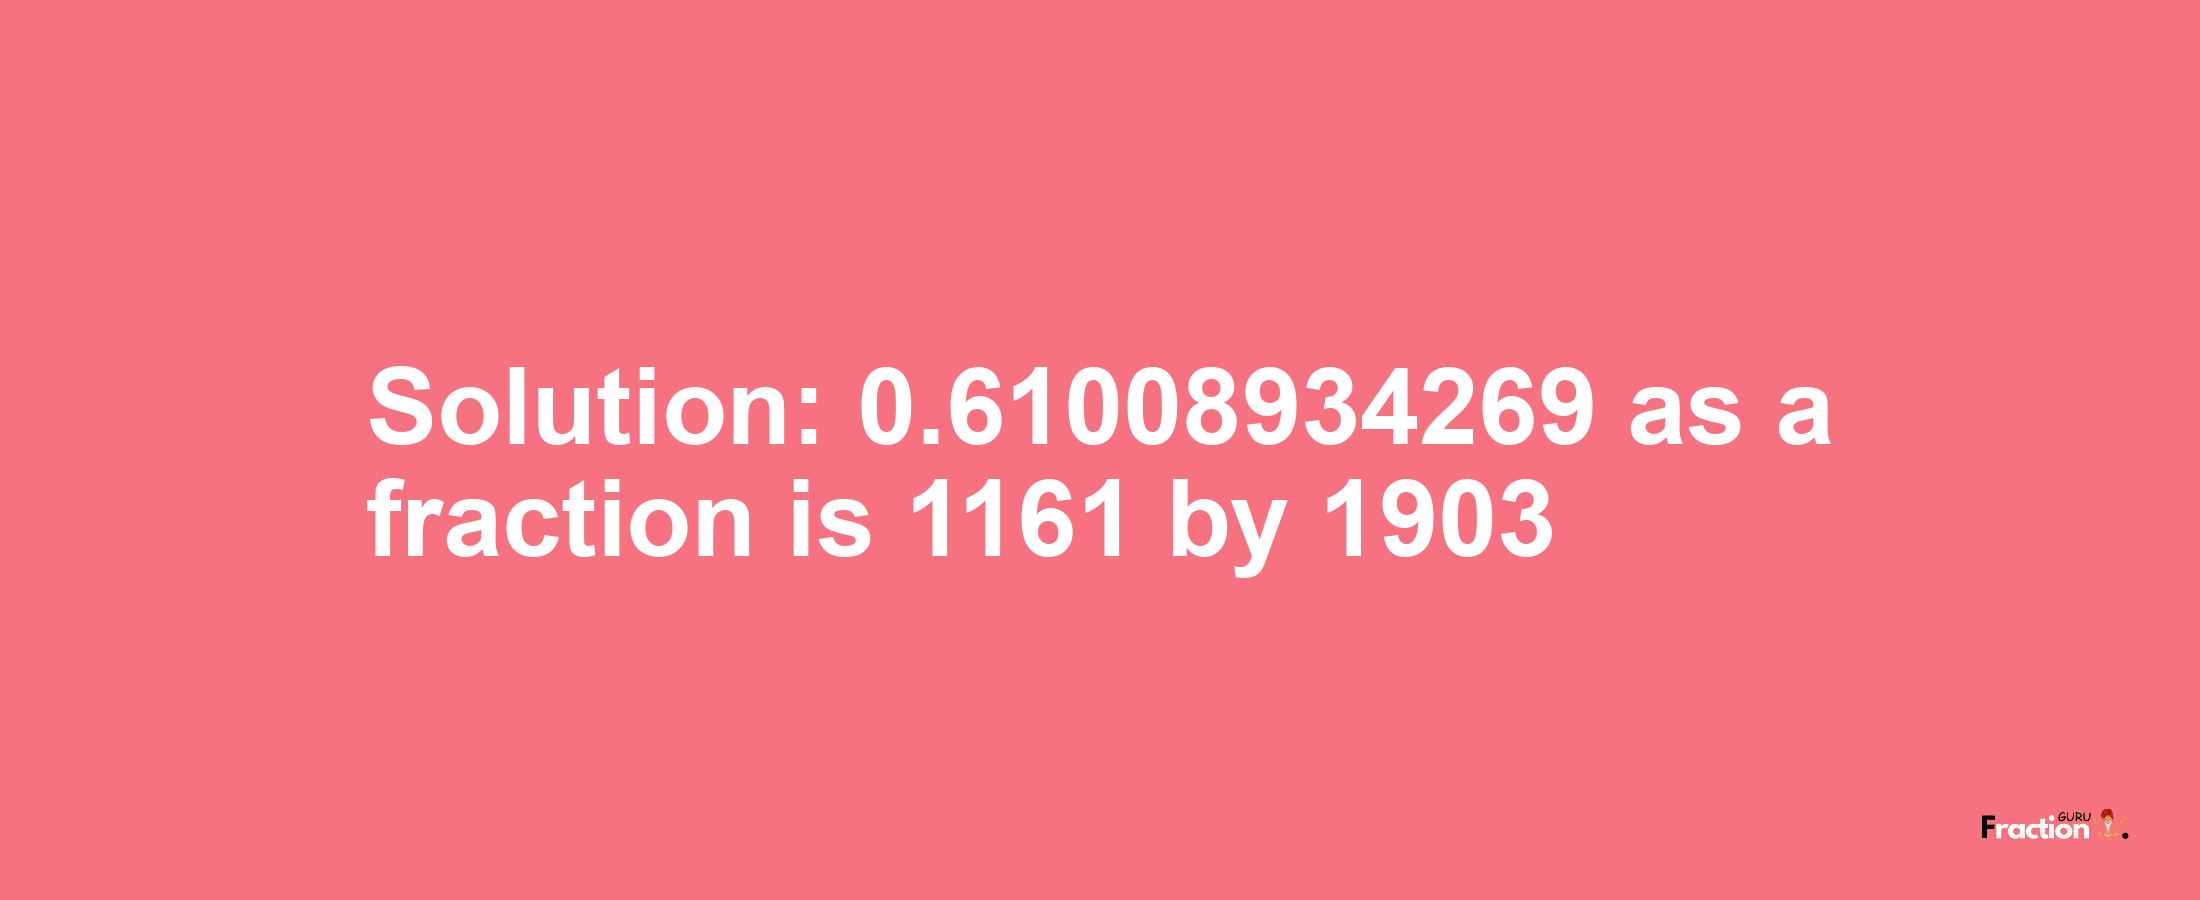 Solution:0.61008934269 as a fraction is 1161/1903